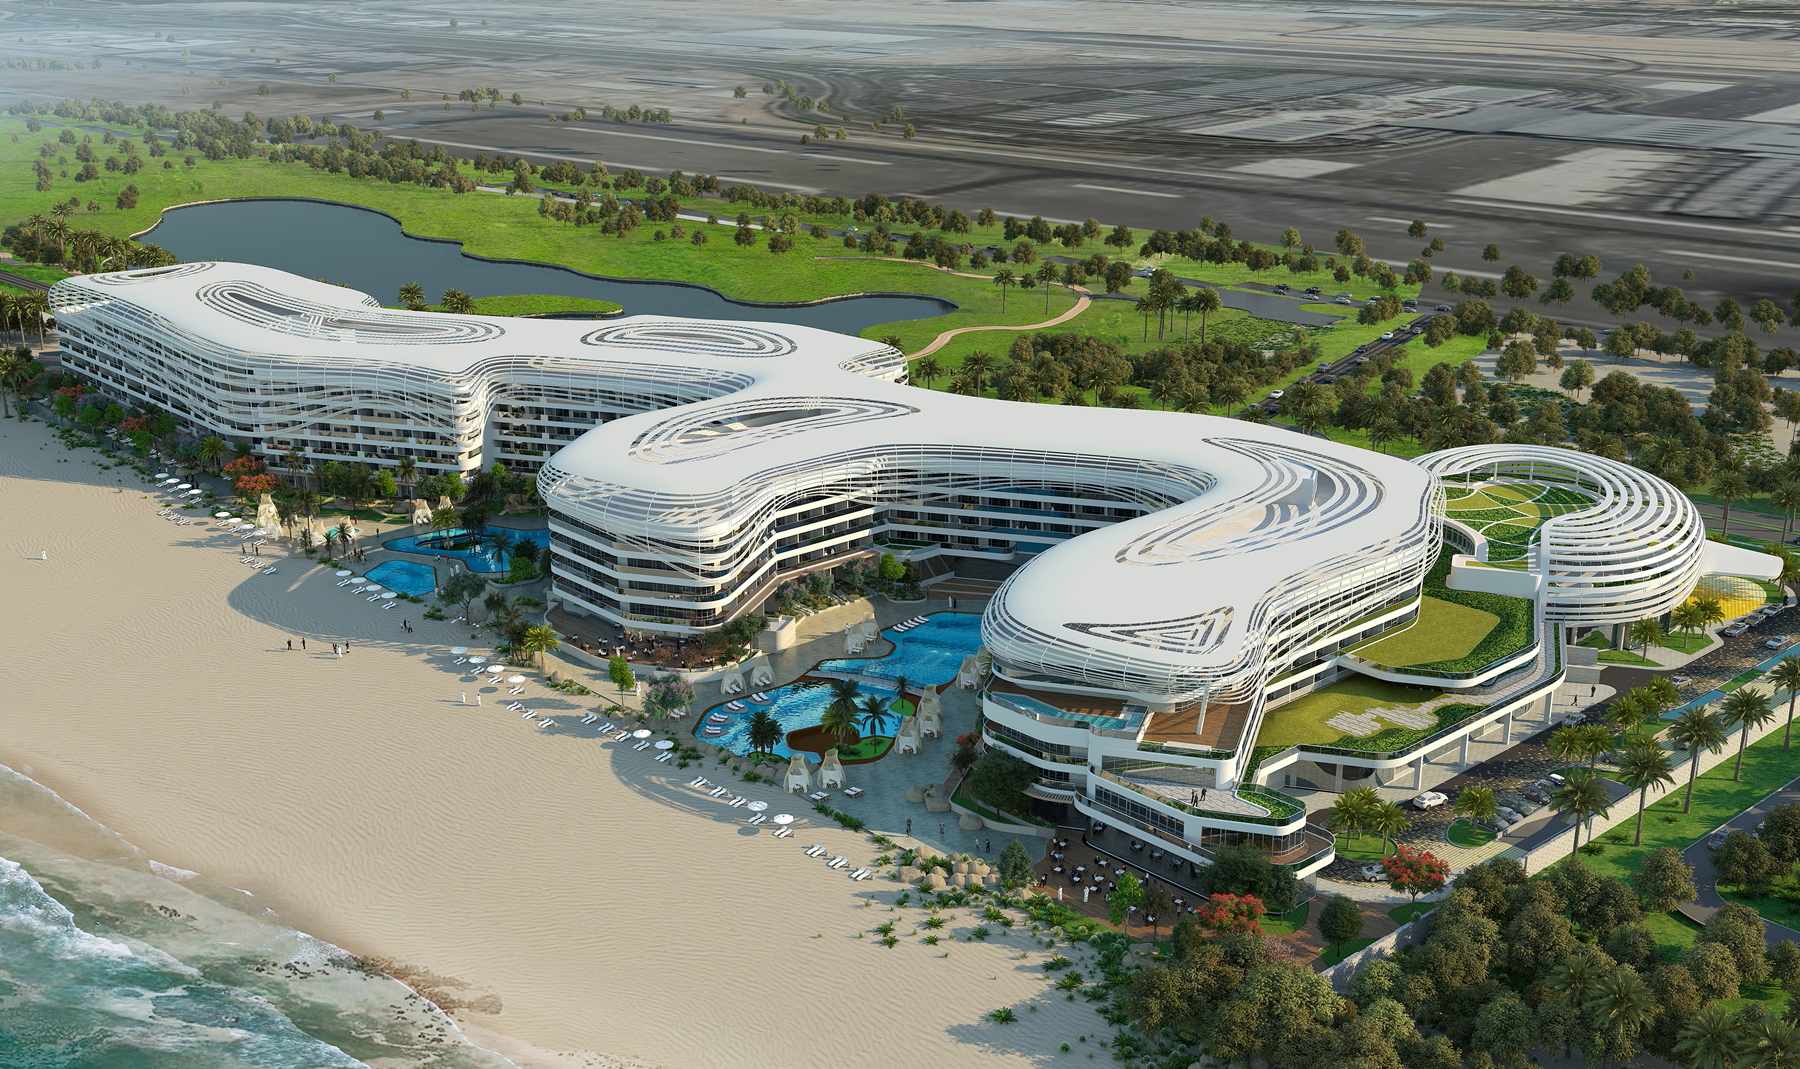 Marriott has signed an agreement with Alfardan Group to open the first St. Regis hotel in Oman. Scheduled to open in 2022, the 271-room St. Regis Al Mouj Muscat Resort will be located on a prime beachfront plot within Oman’s lifestyle and leisure destination, Al Mouj Muscat. The project also includes plans for 170 branded residential units. Click to enlarge.